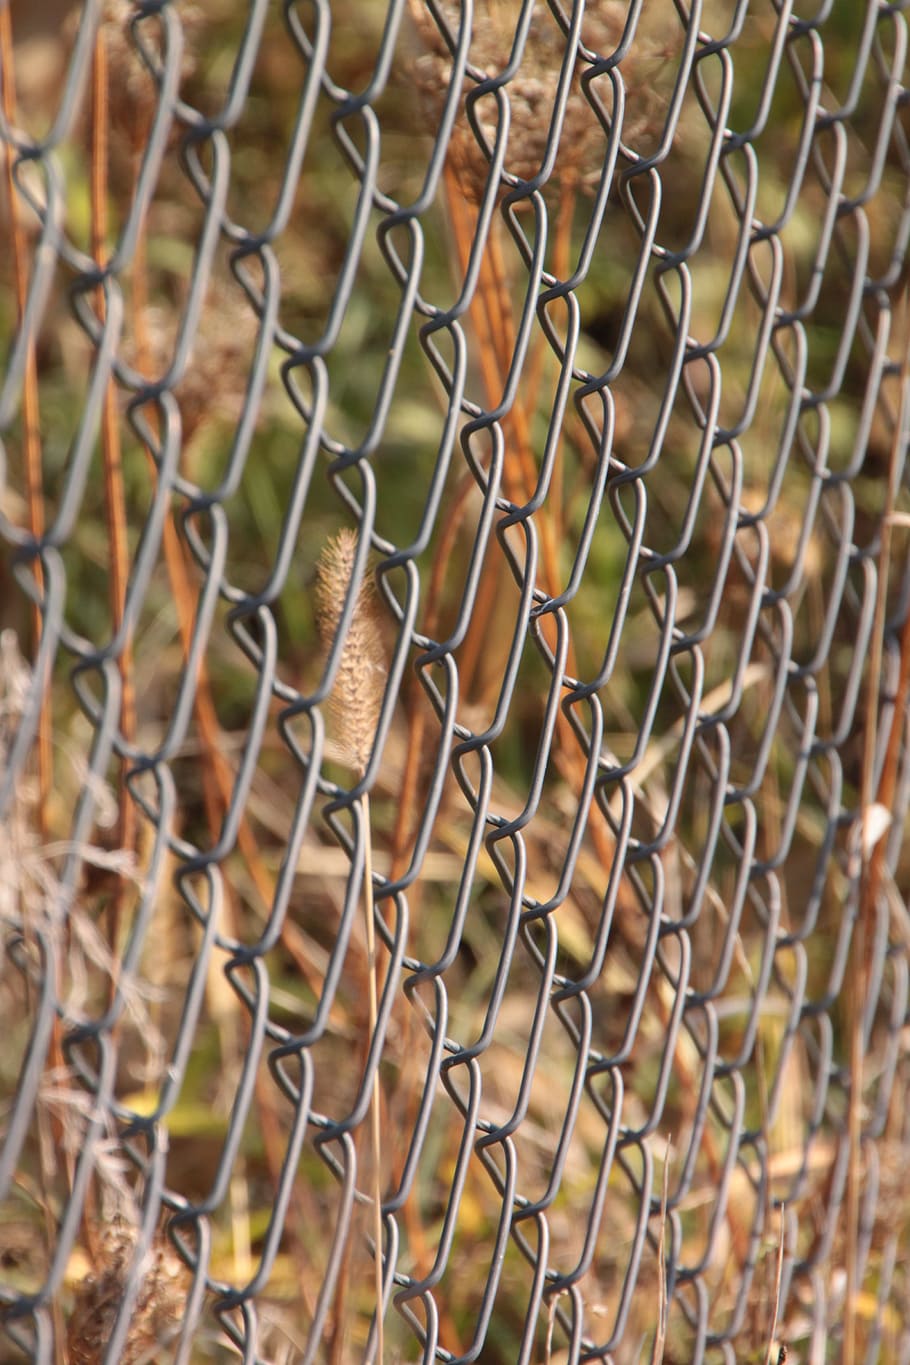 Chain, Fence, Fencing, Galvanized, Link, metal, wire, industries, chainlink fence, full frame